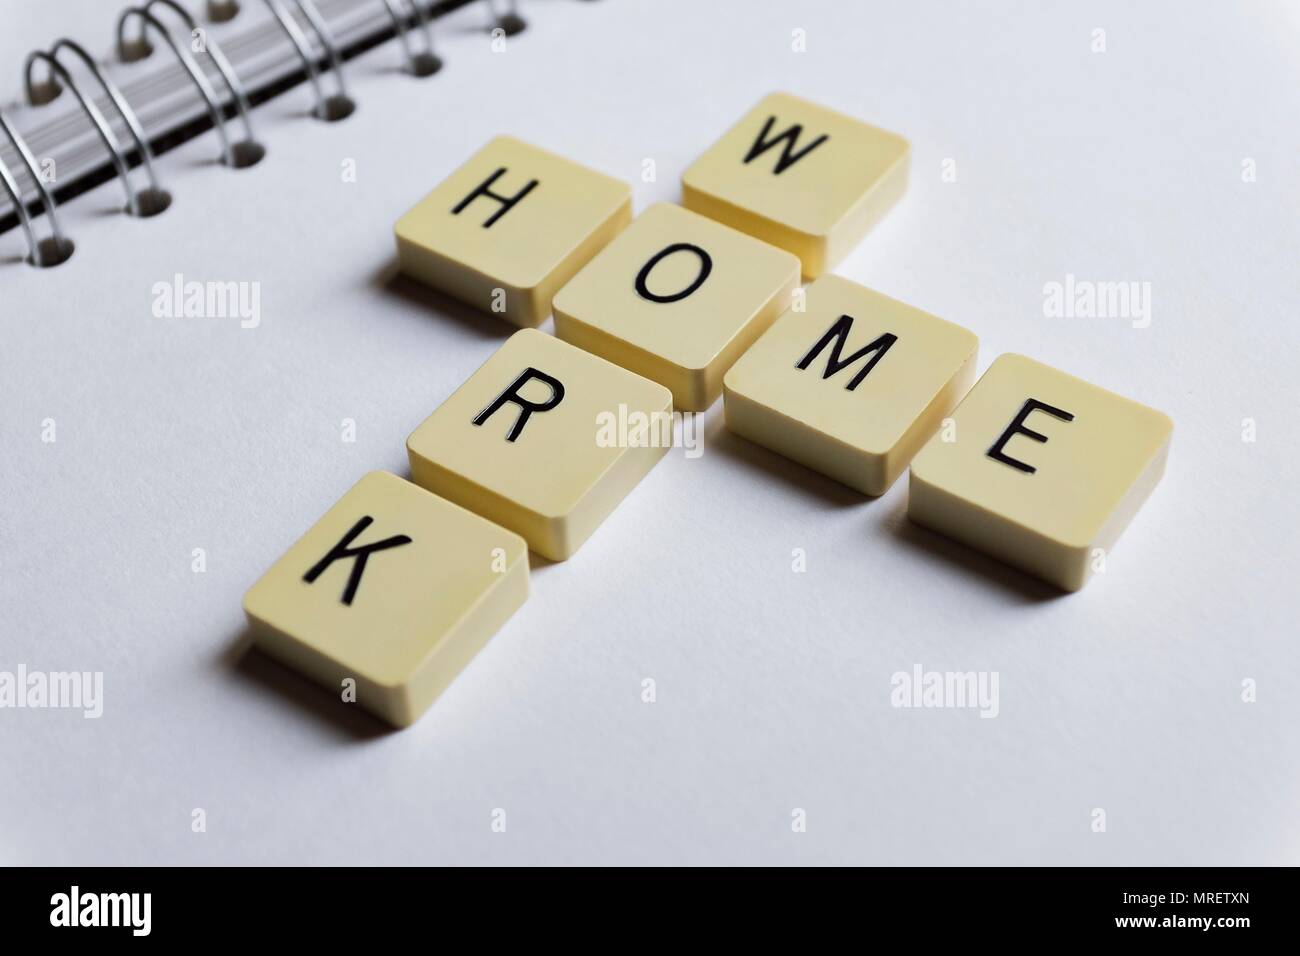 Tiles with letters spelling the words home and work. Stock Photo